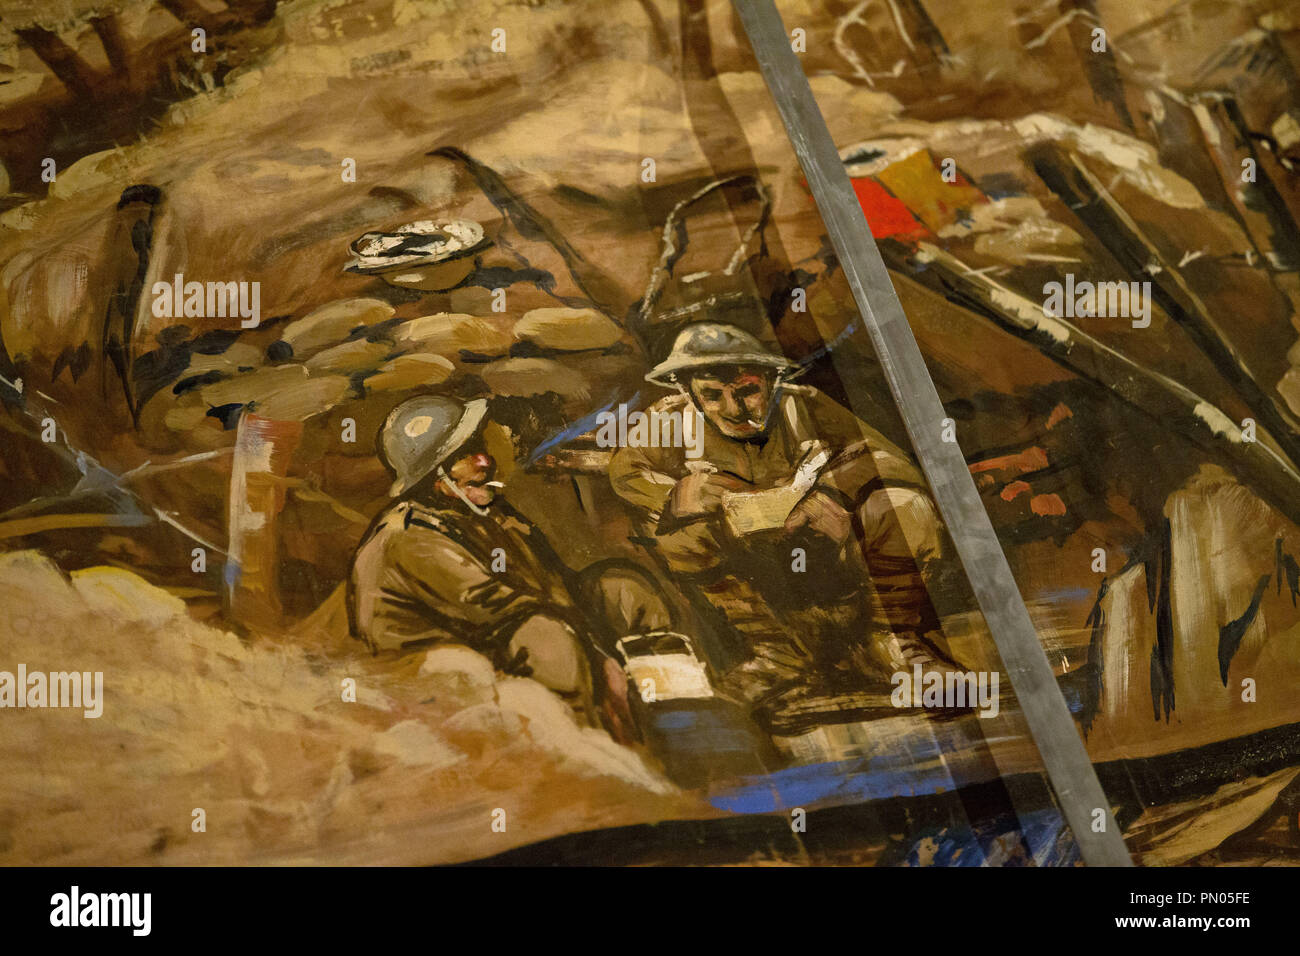 The North Staffordshire 5th Battalion Memorial canvas depicting scenes from WW1 on display at The Potteries Museum and Art Gallery in Stoke-on-Trent. Stock Photo